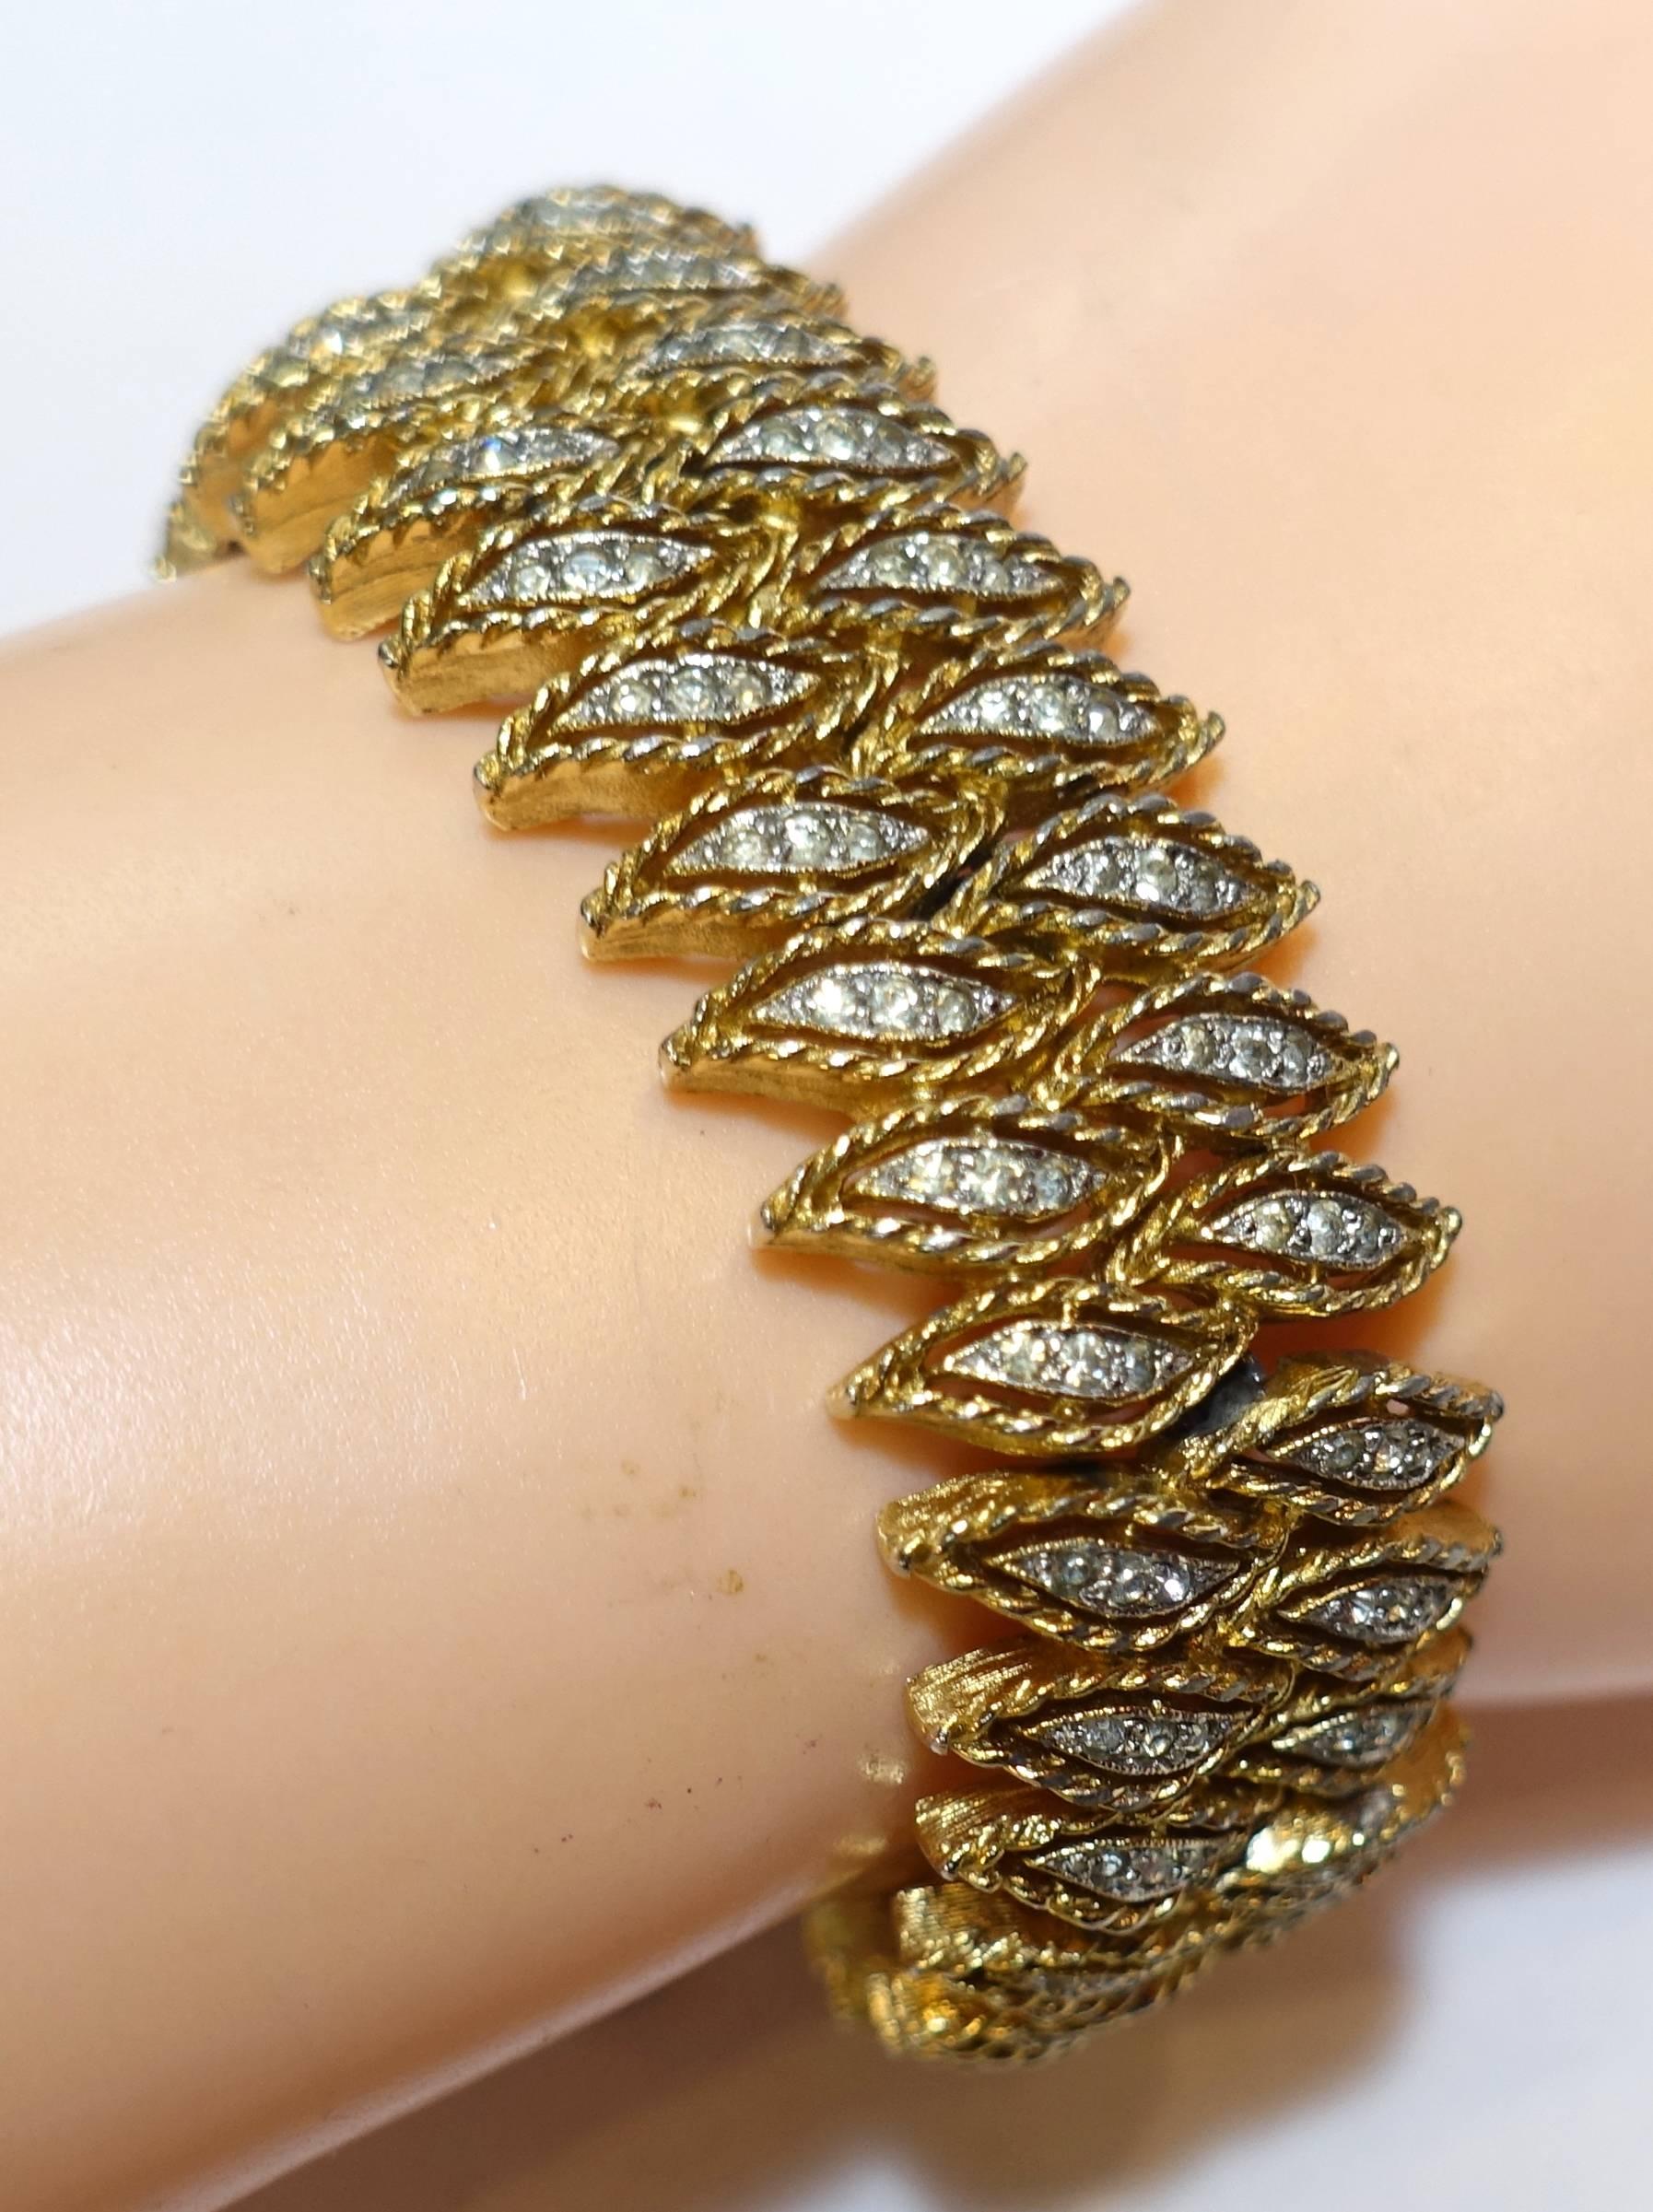 Panetta was known for their gorgeous jewelry and how it looked like real jewelry.  This vintage bracelet is no exception.  It has a double row of diamond shape teardrops with rhinestone centers.  It is made in a gold tone base metal with a slide in